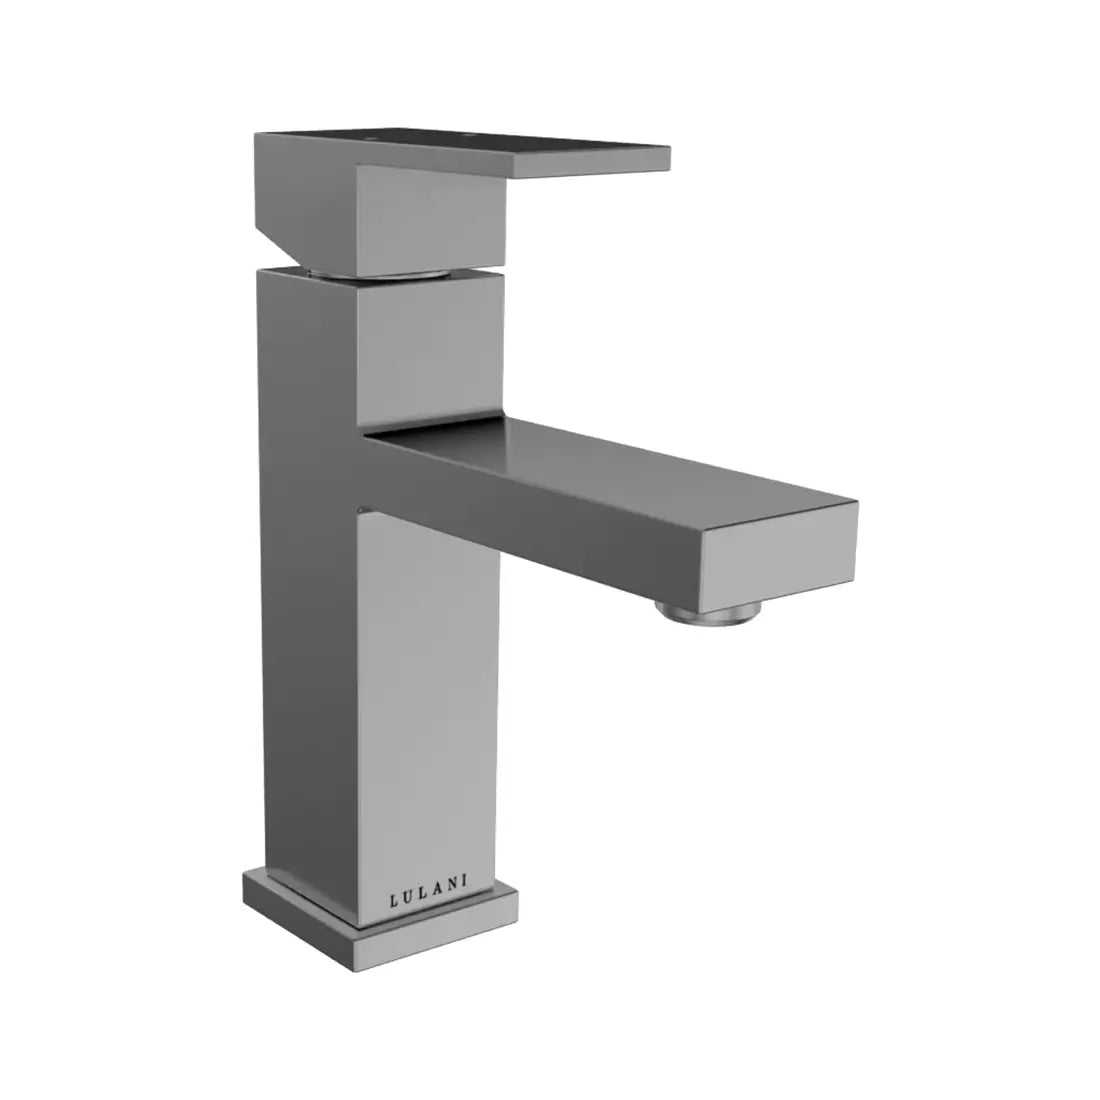 SORIANO BATH THREE HOLE WIDESPREAD DECK MOUNTED LAVATORY FAUCET IN BRUSHED  STAINLESS STEEL 並行輸入品 浴室、浴槽、洗面所